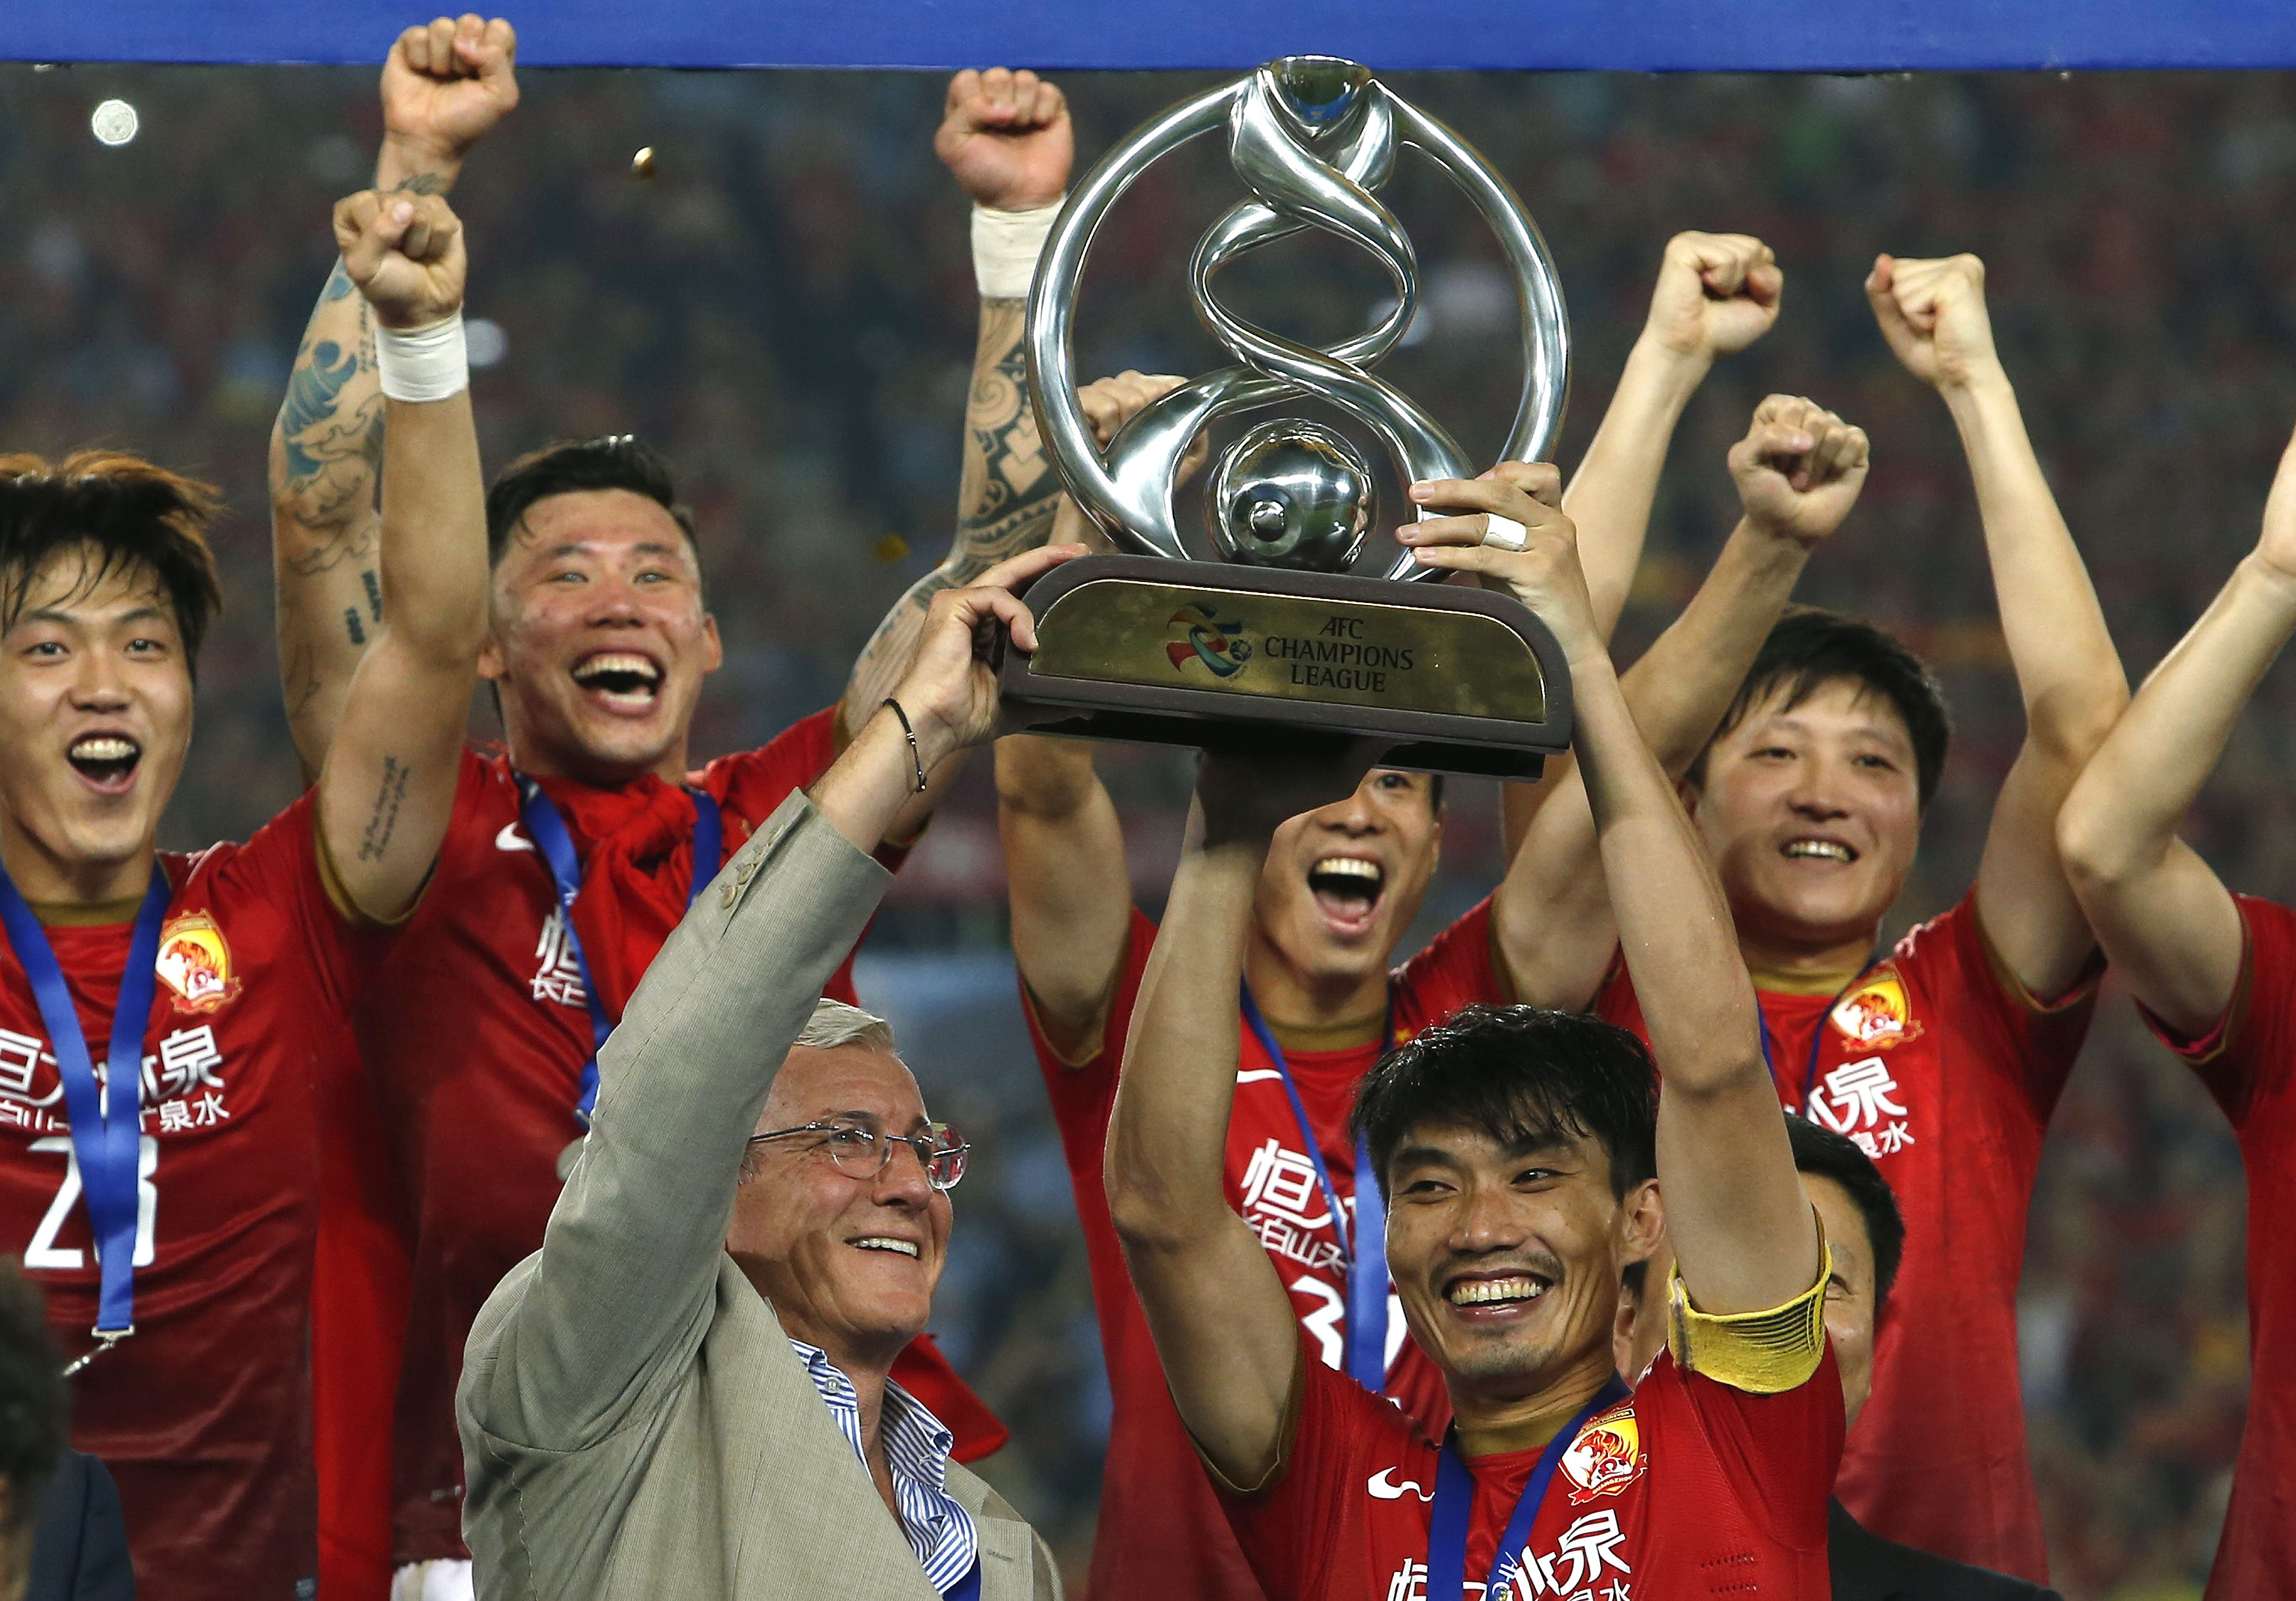 China's Guangzhou Evergrande coach Marcello Lippi and Zheng Zhi hold up the trophy after winning their final match of the AFC Champions' League against South Korea's FC Seoul in Guangzhou